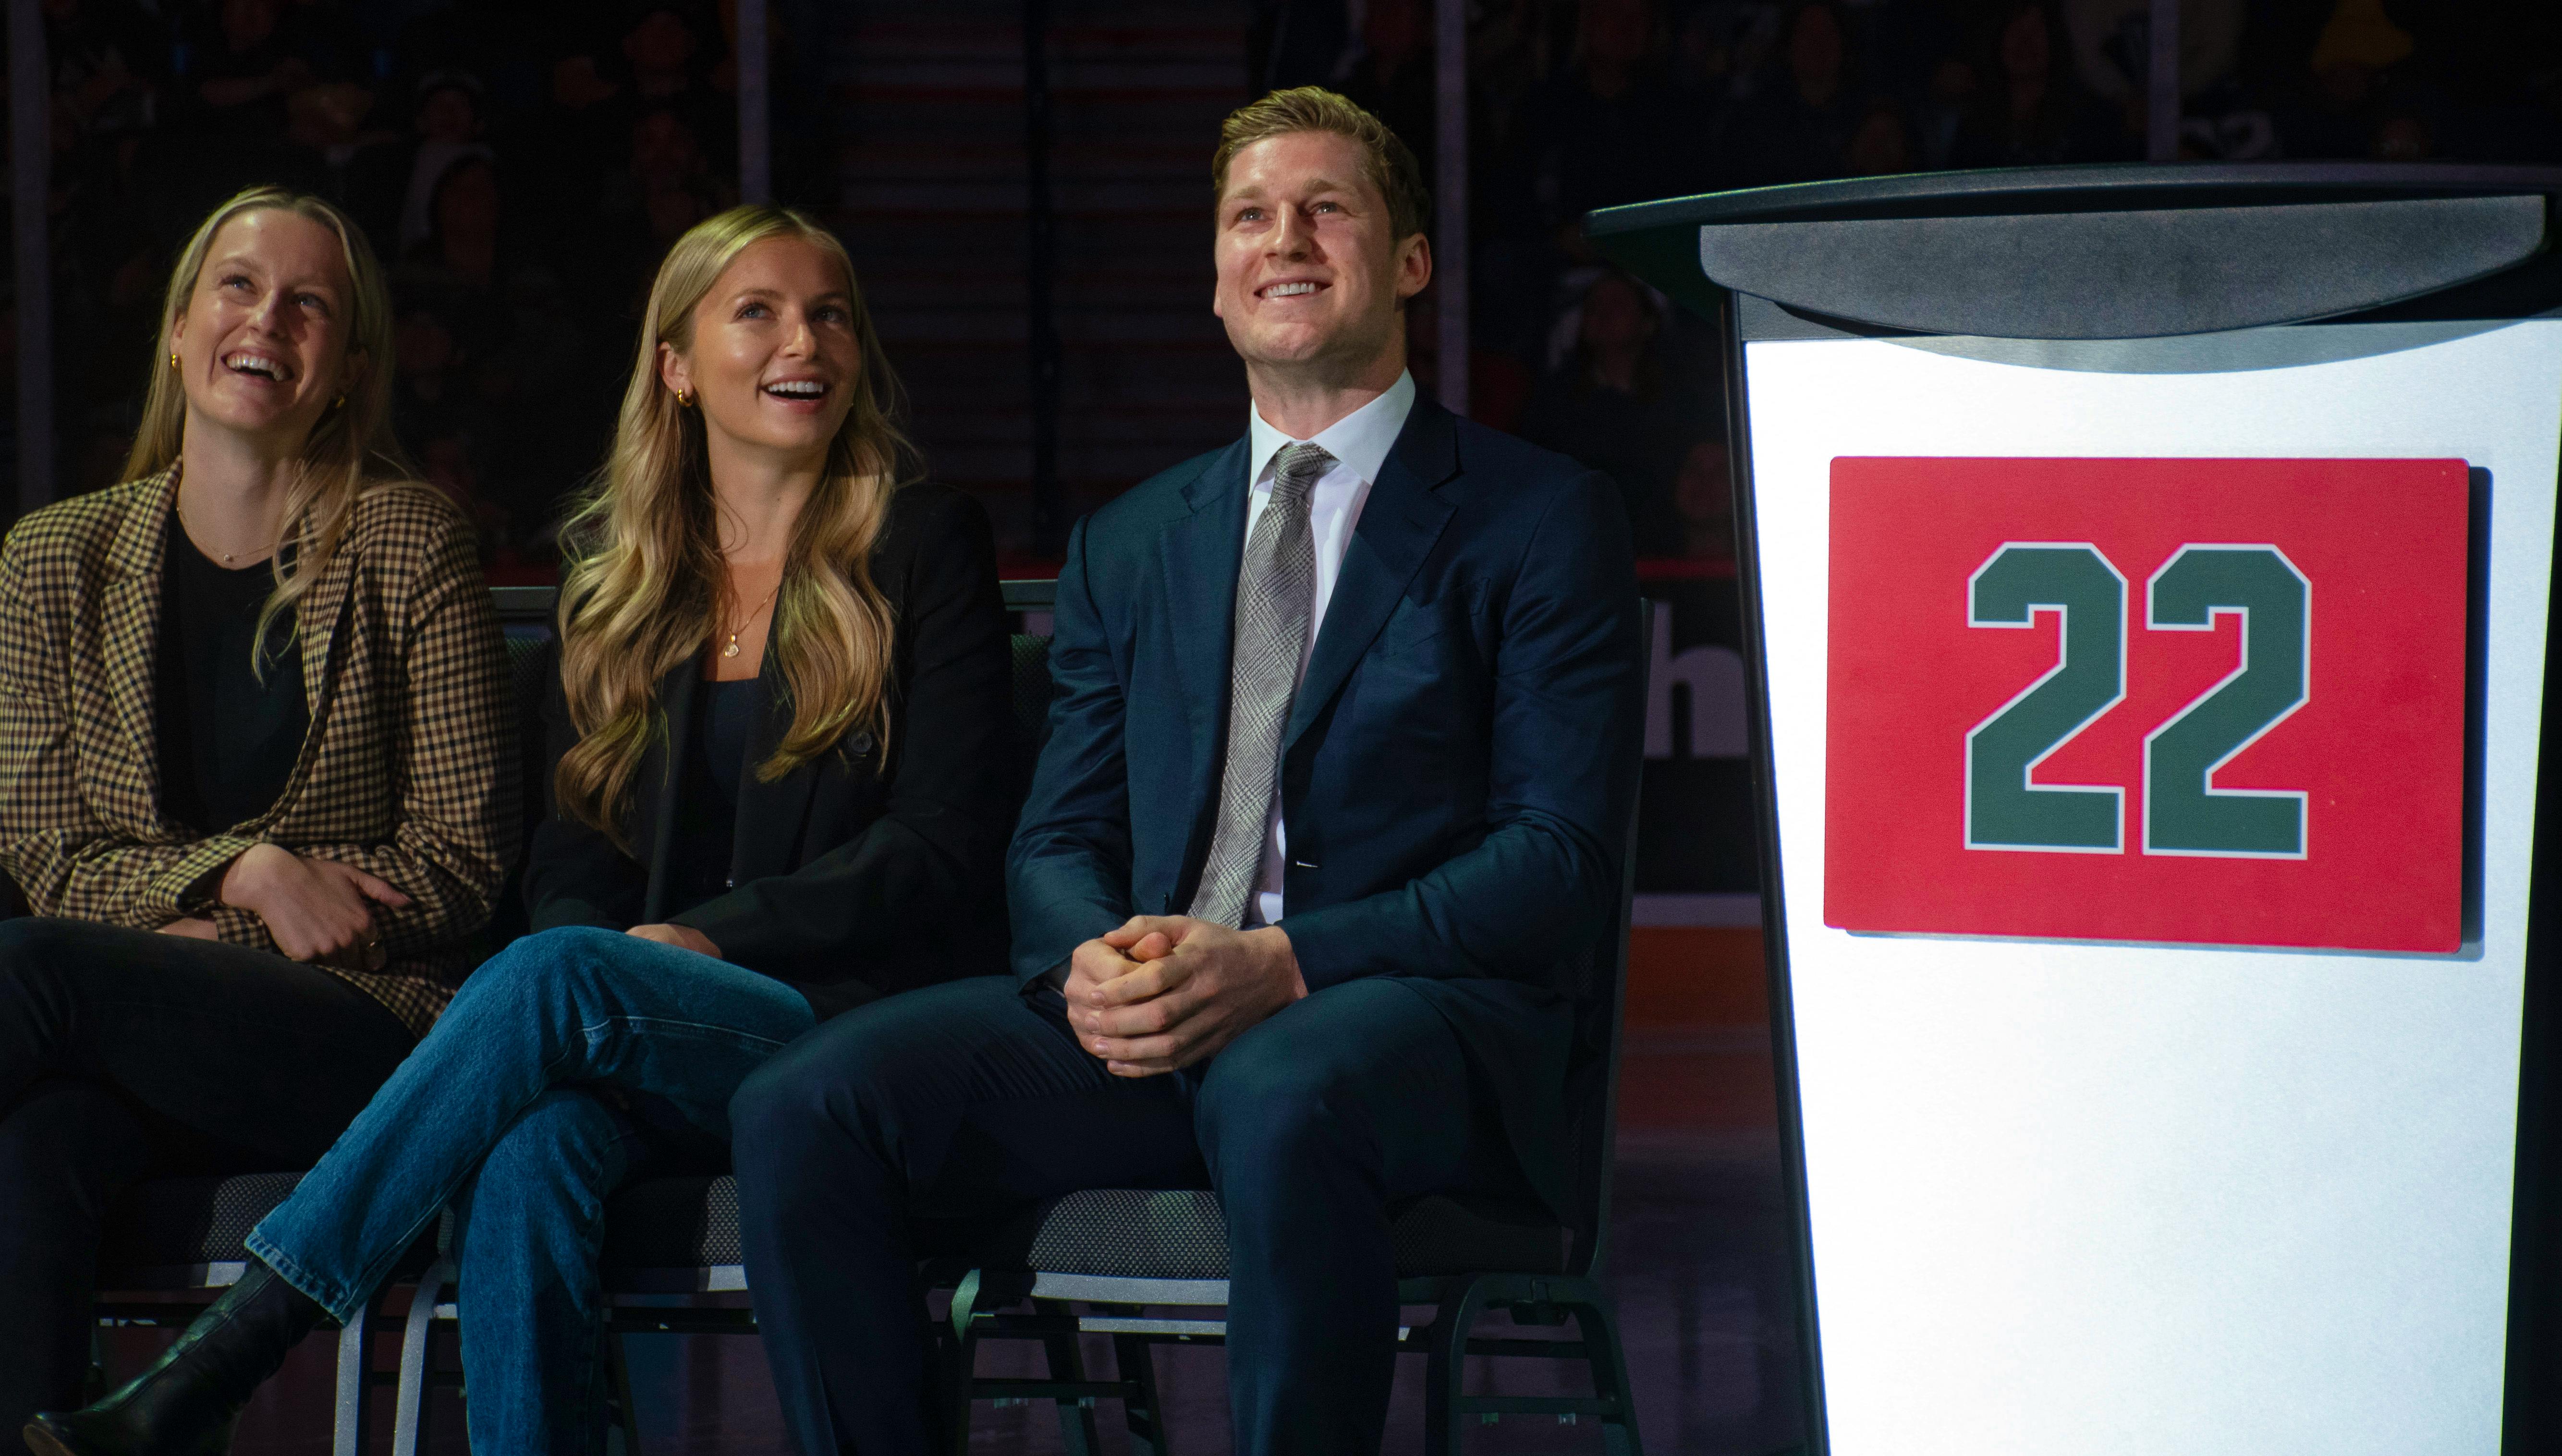 Mooseheads retire Nathan Mackinnon's number